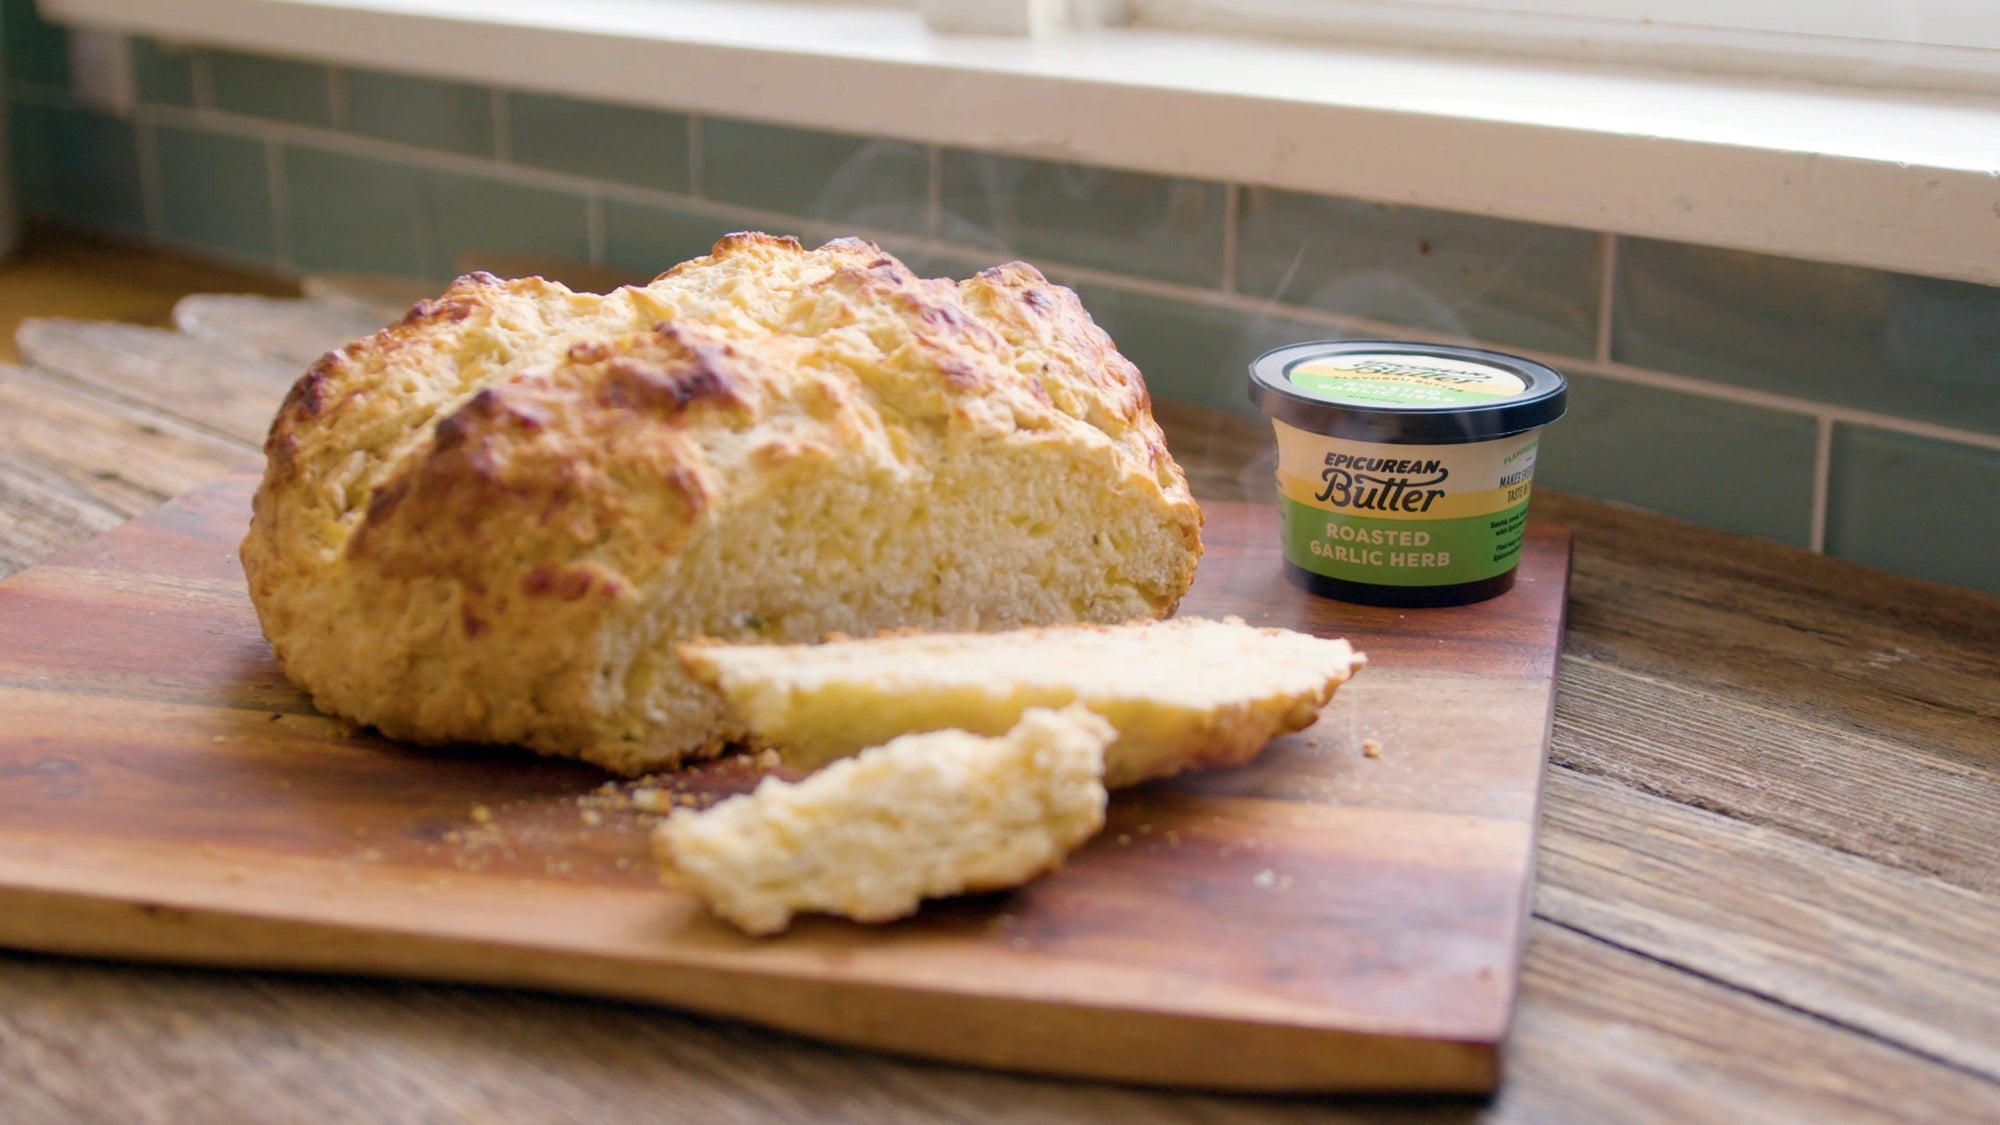 Irish Soda Bread made with Epicurean Butter Roasted Garlic Herb Flavored Butter